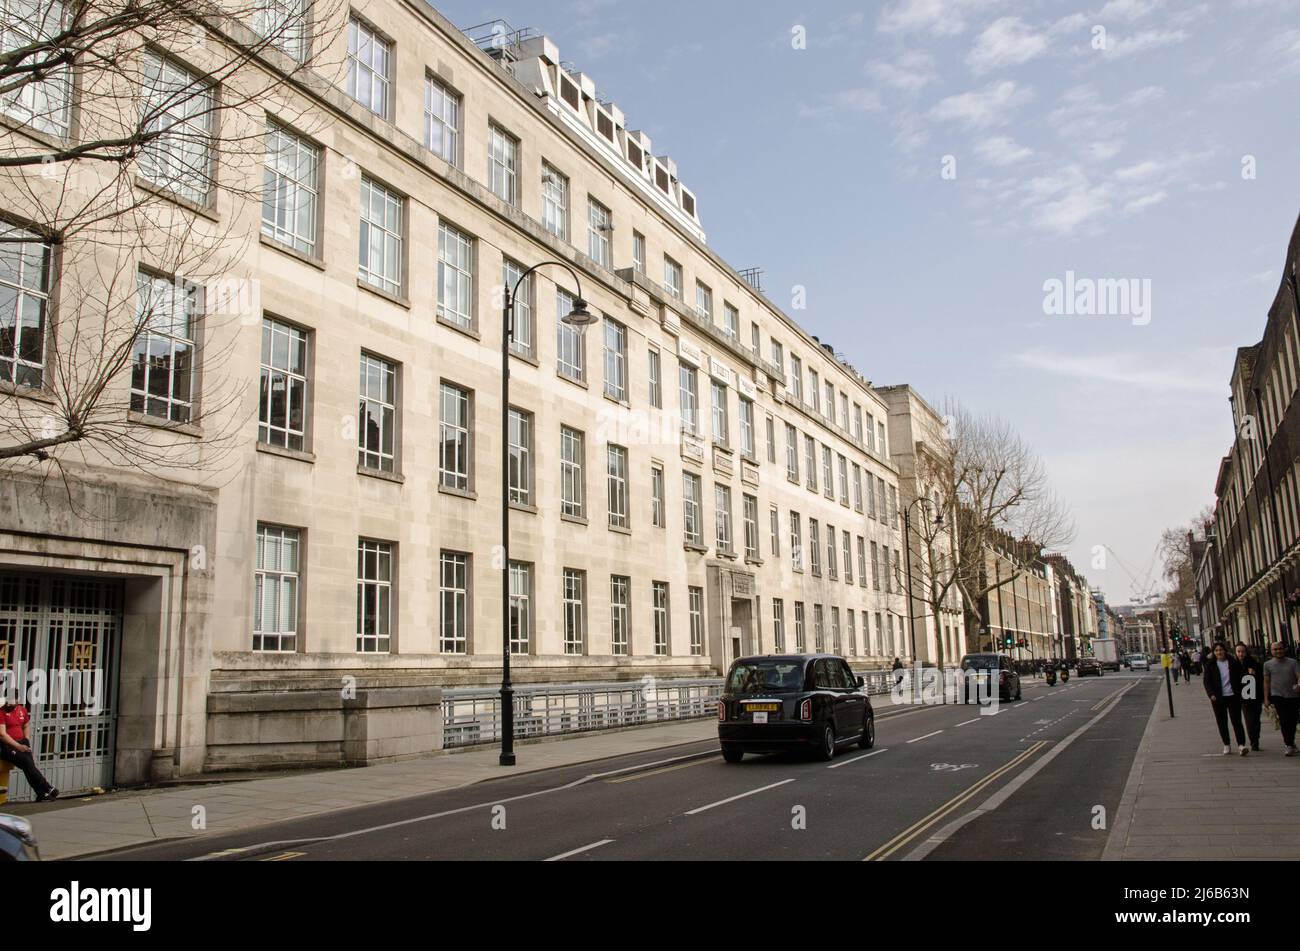 London, UK - March 21, 2022: View of the Gower Street facade of the world famous London School of Hygiene and Tropical Medicine, part of the Universit Stock Photo